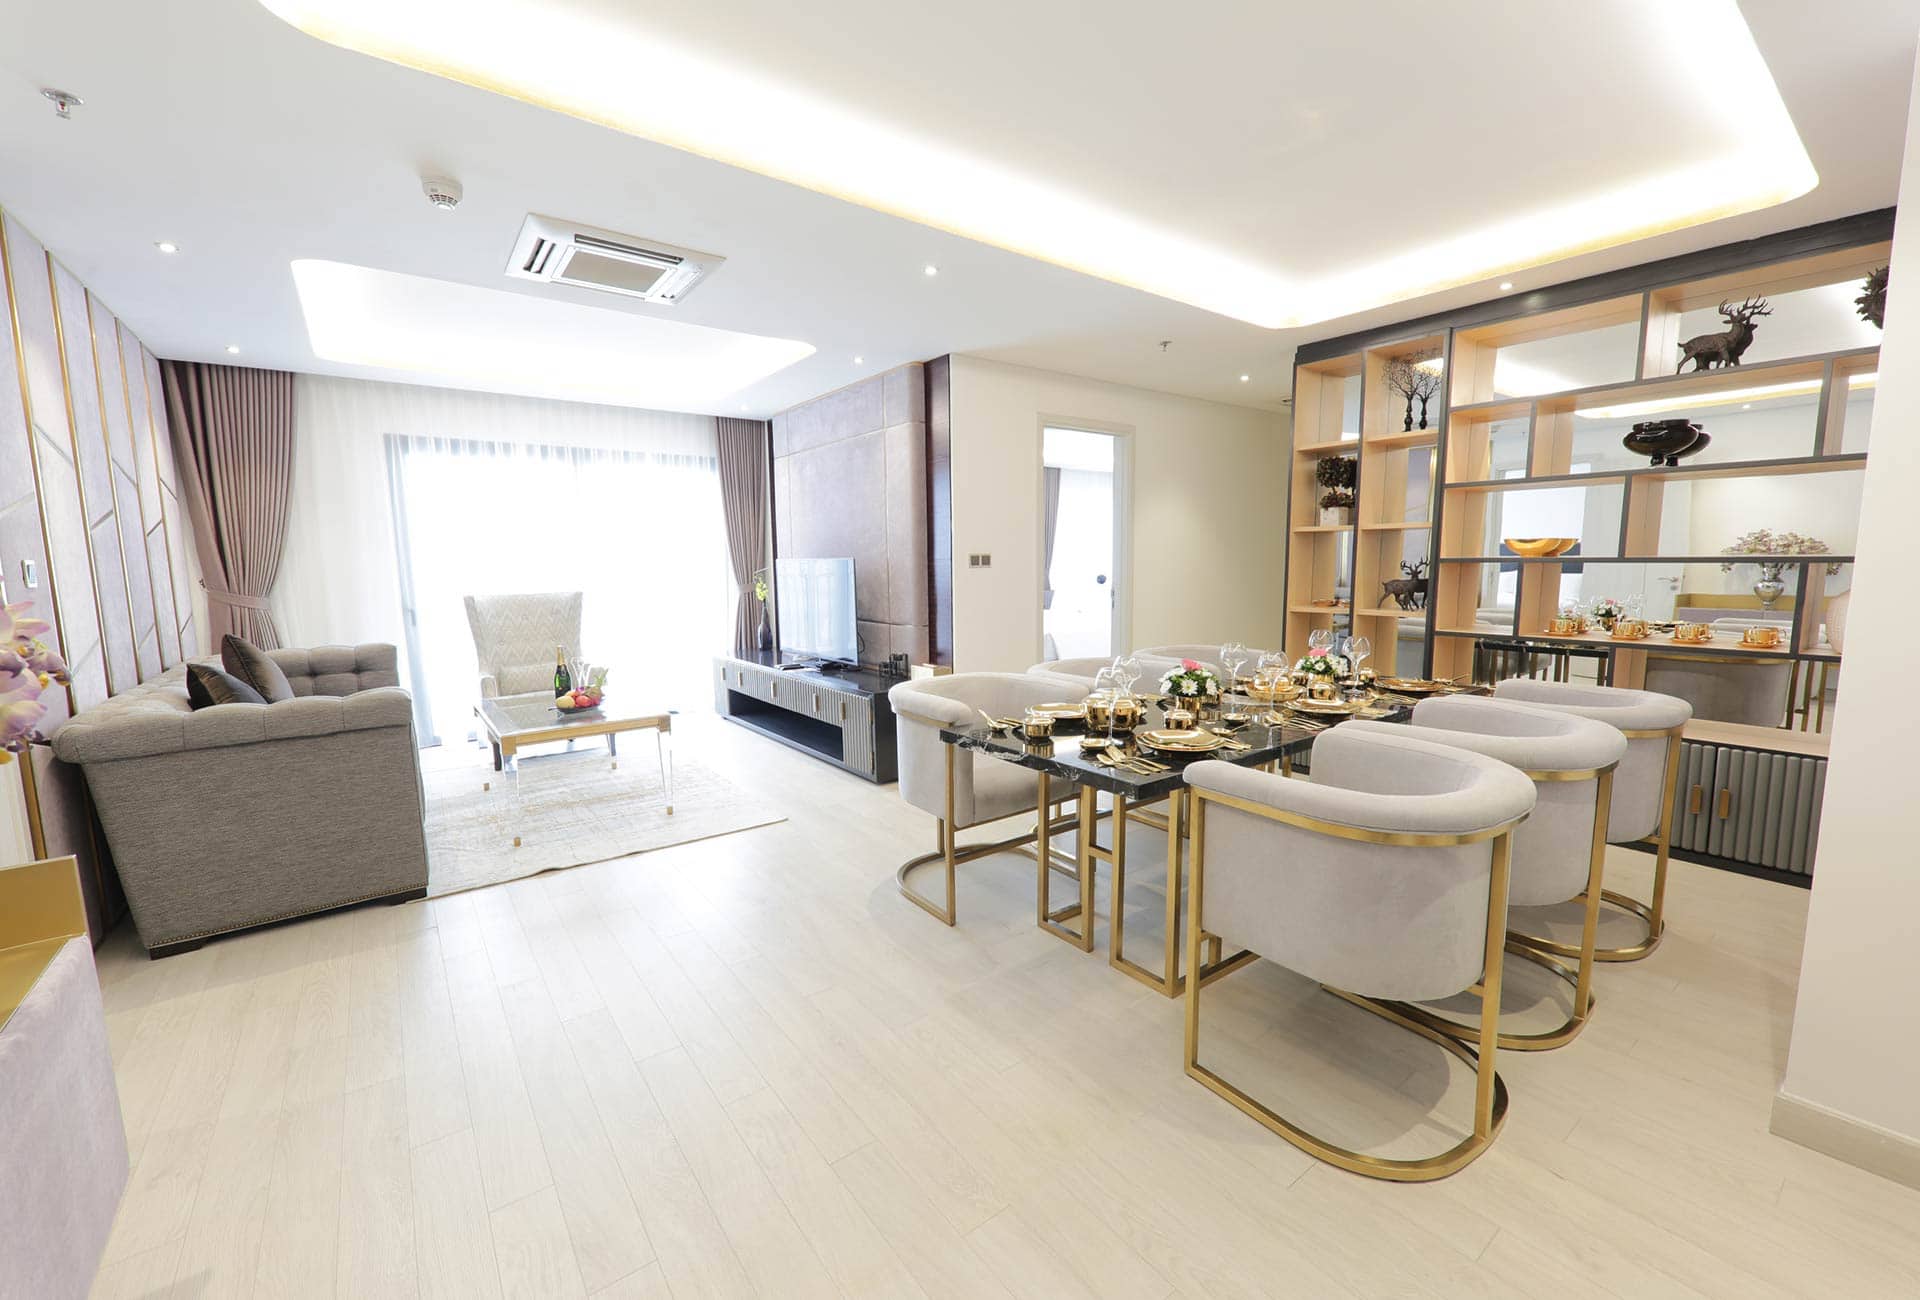 Hạng phòng President Suite